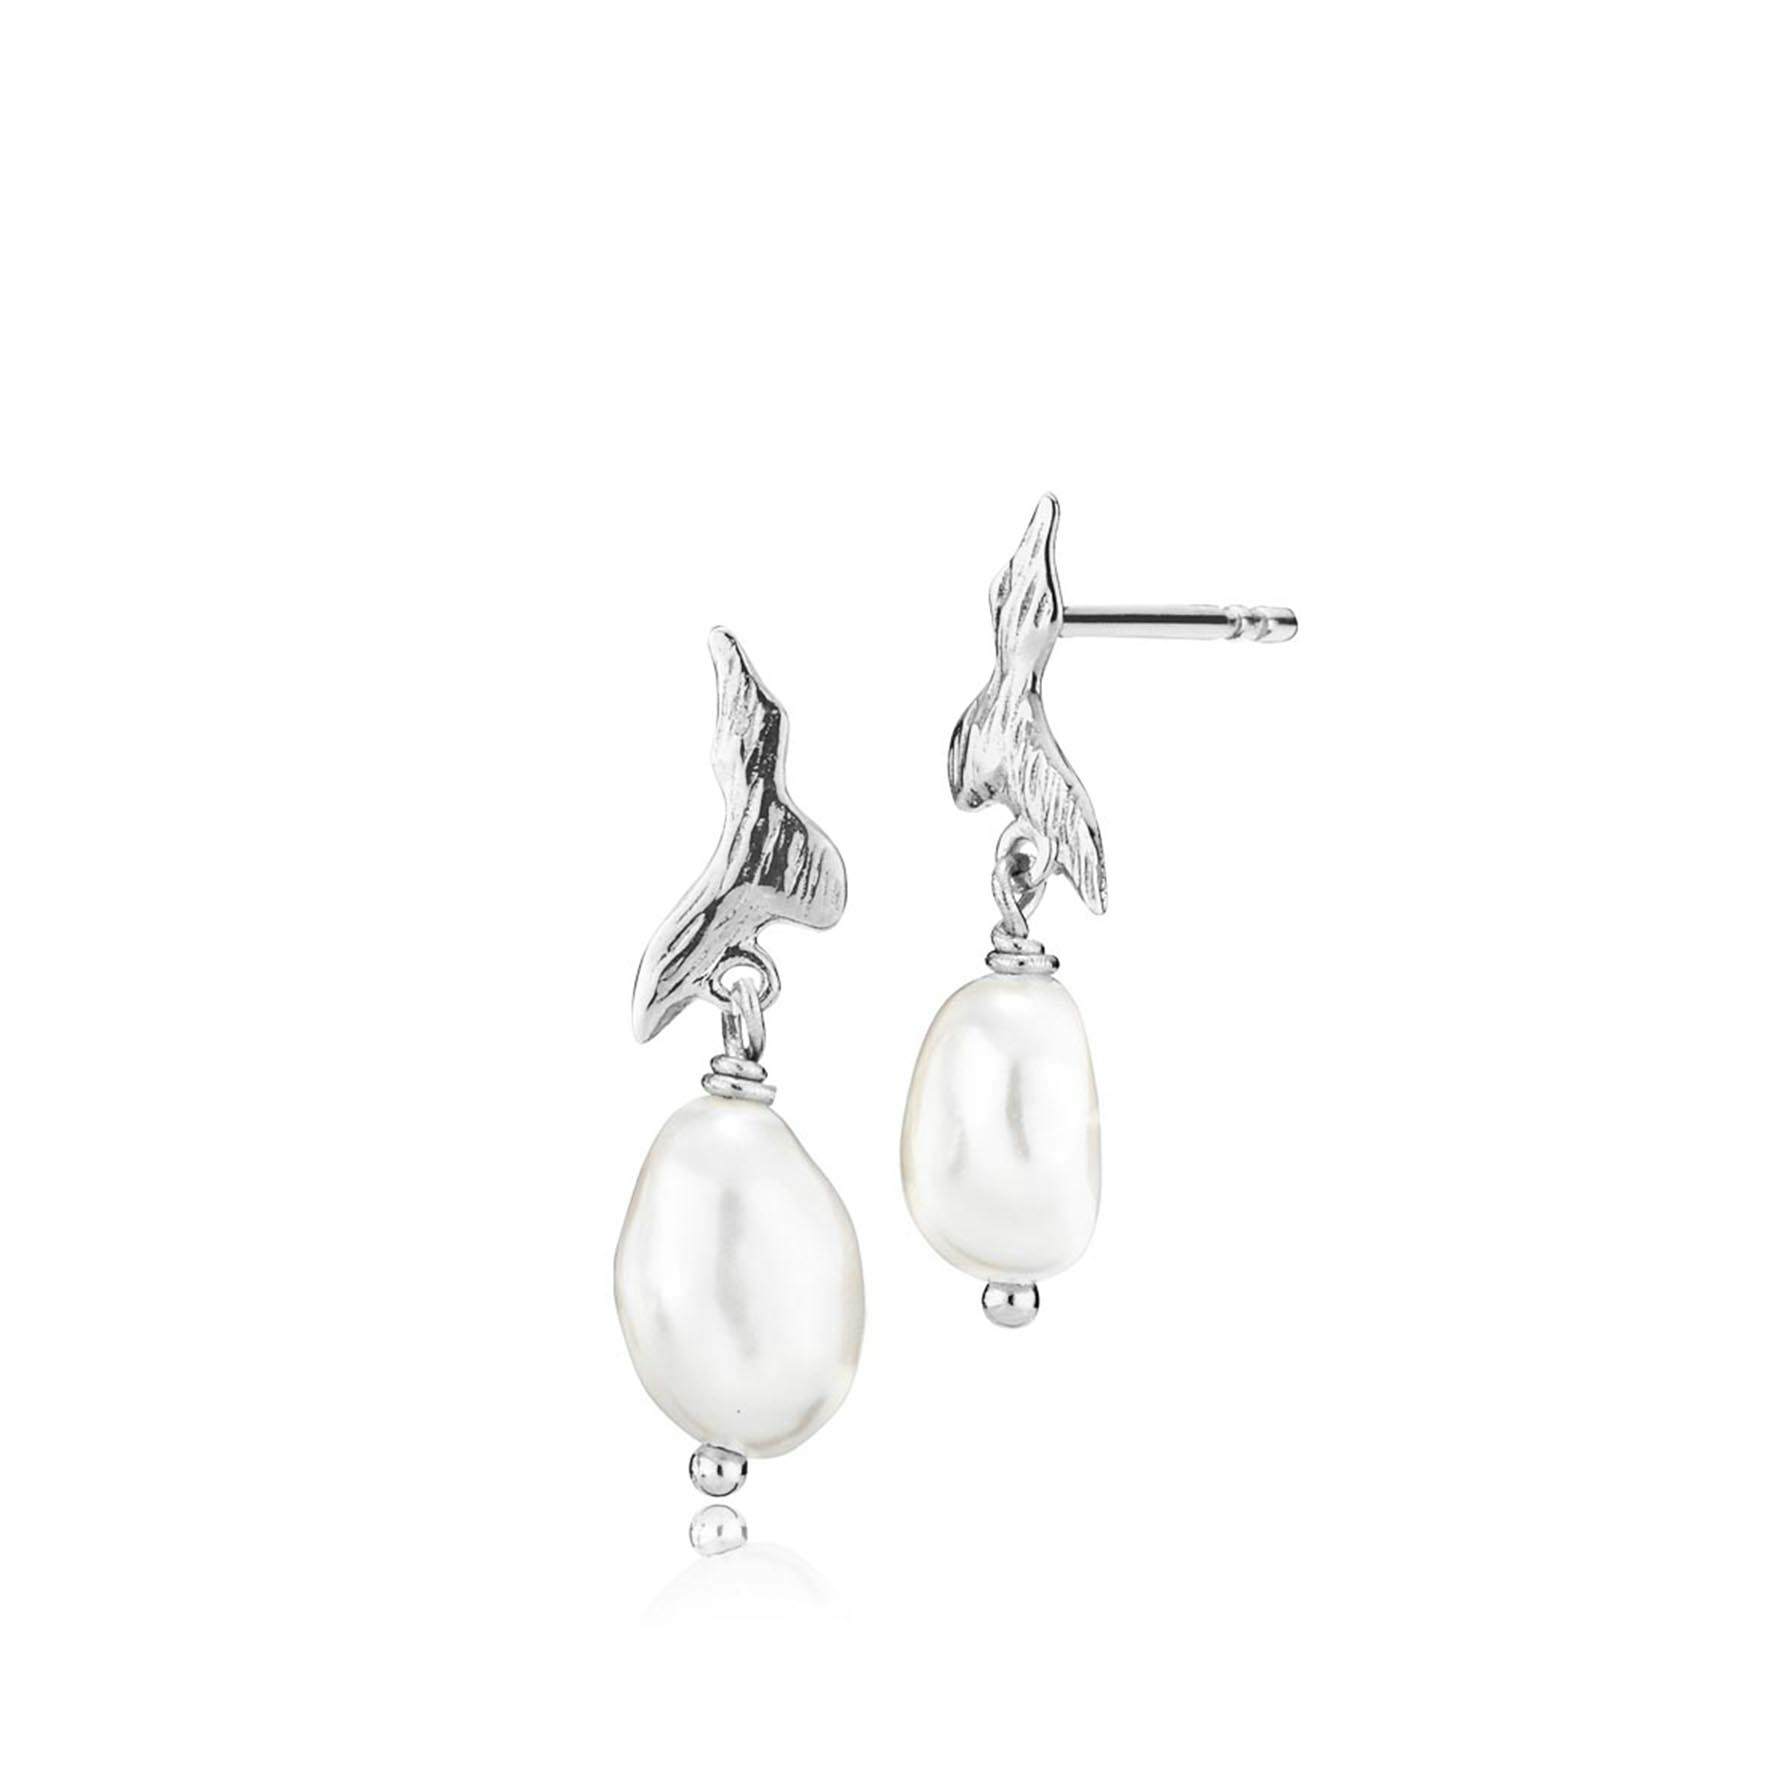 Fairy Earrings With Pearl from Izabel Camille in Silver Sterling 925